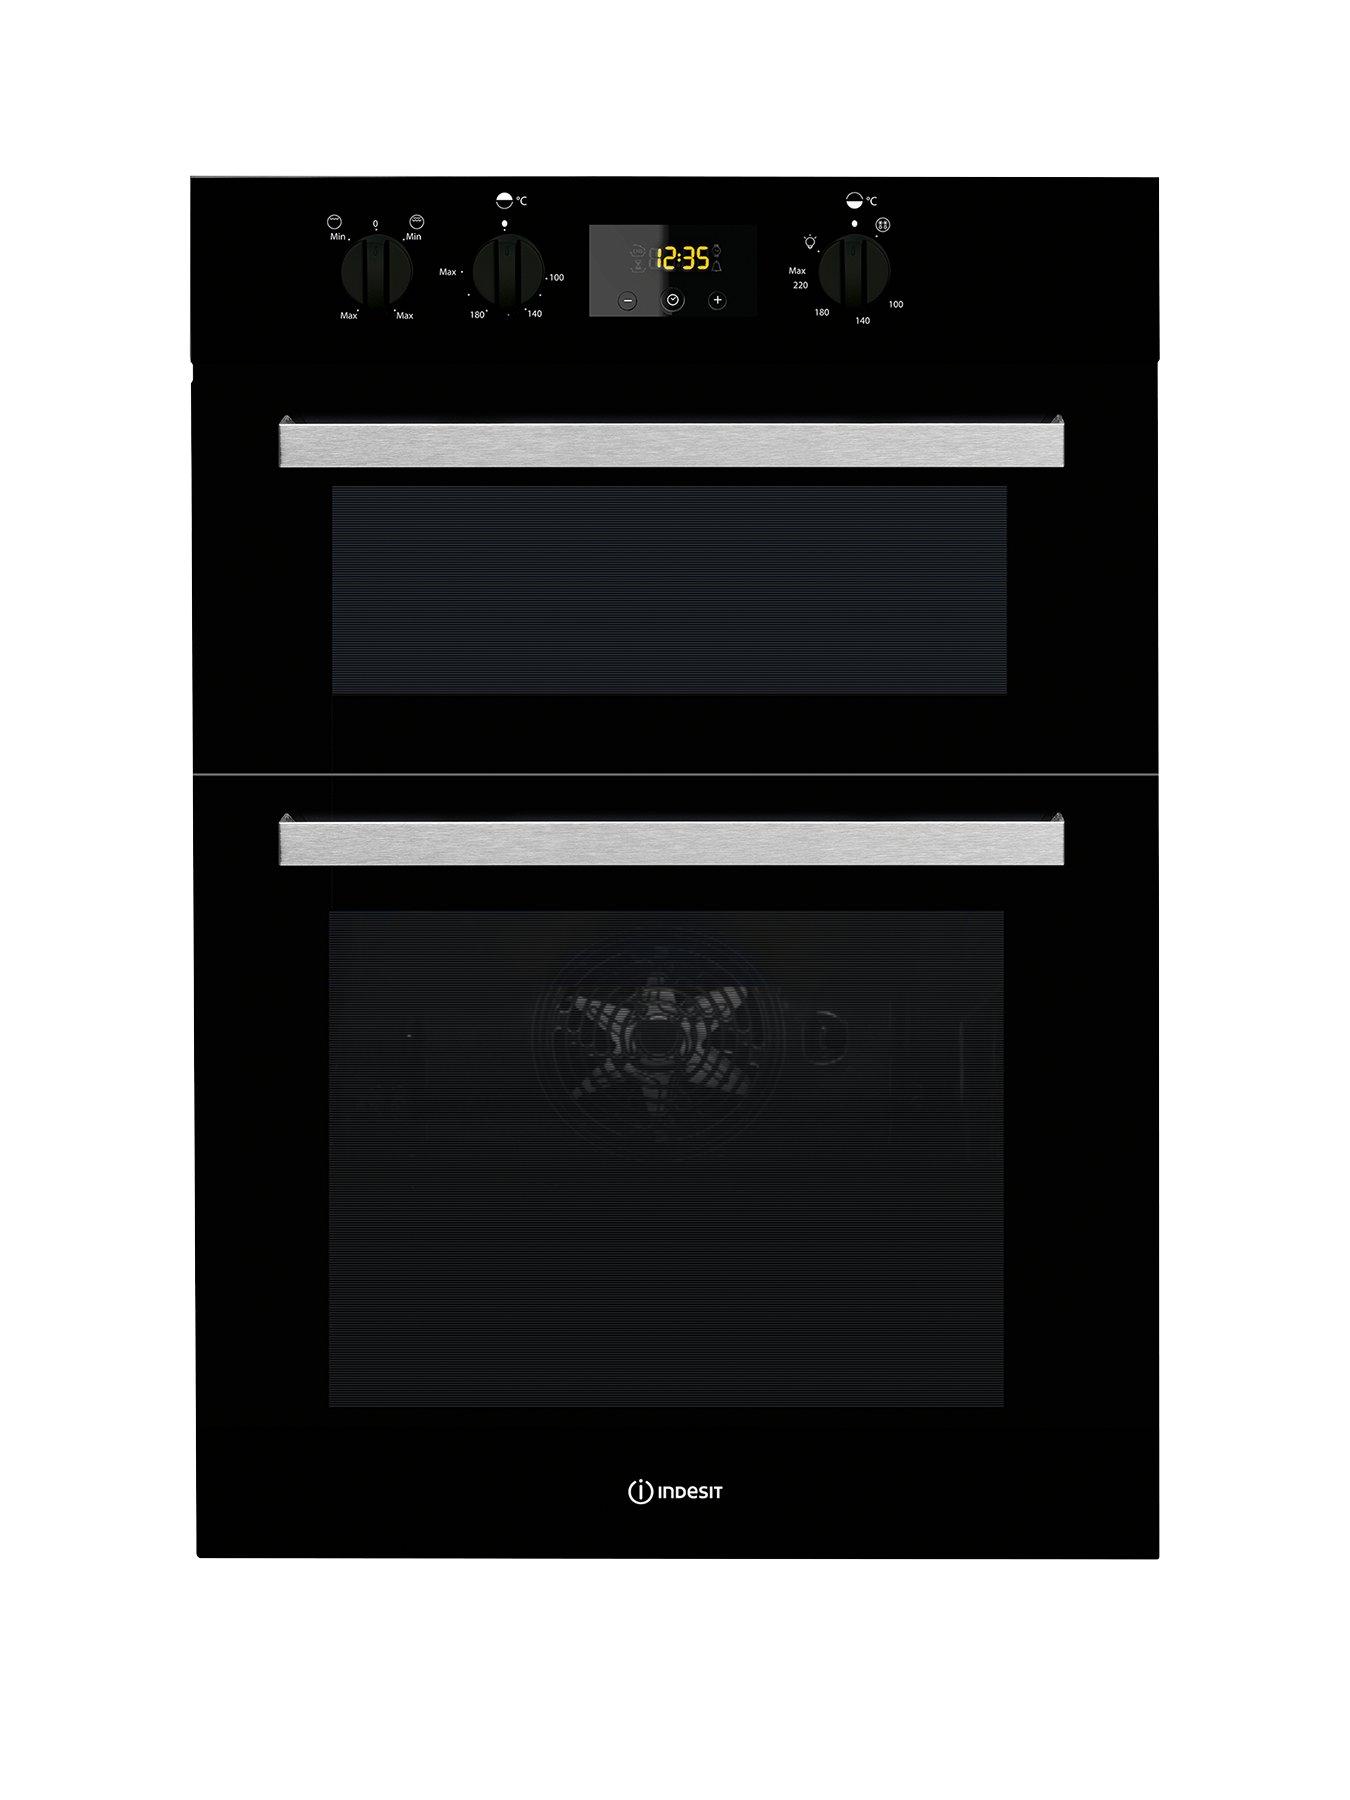 Indesit Aria Idd6340Bl Built-In Double Electric Oven - Black - Oven Only